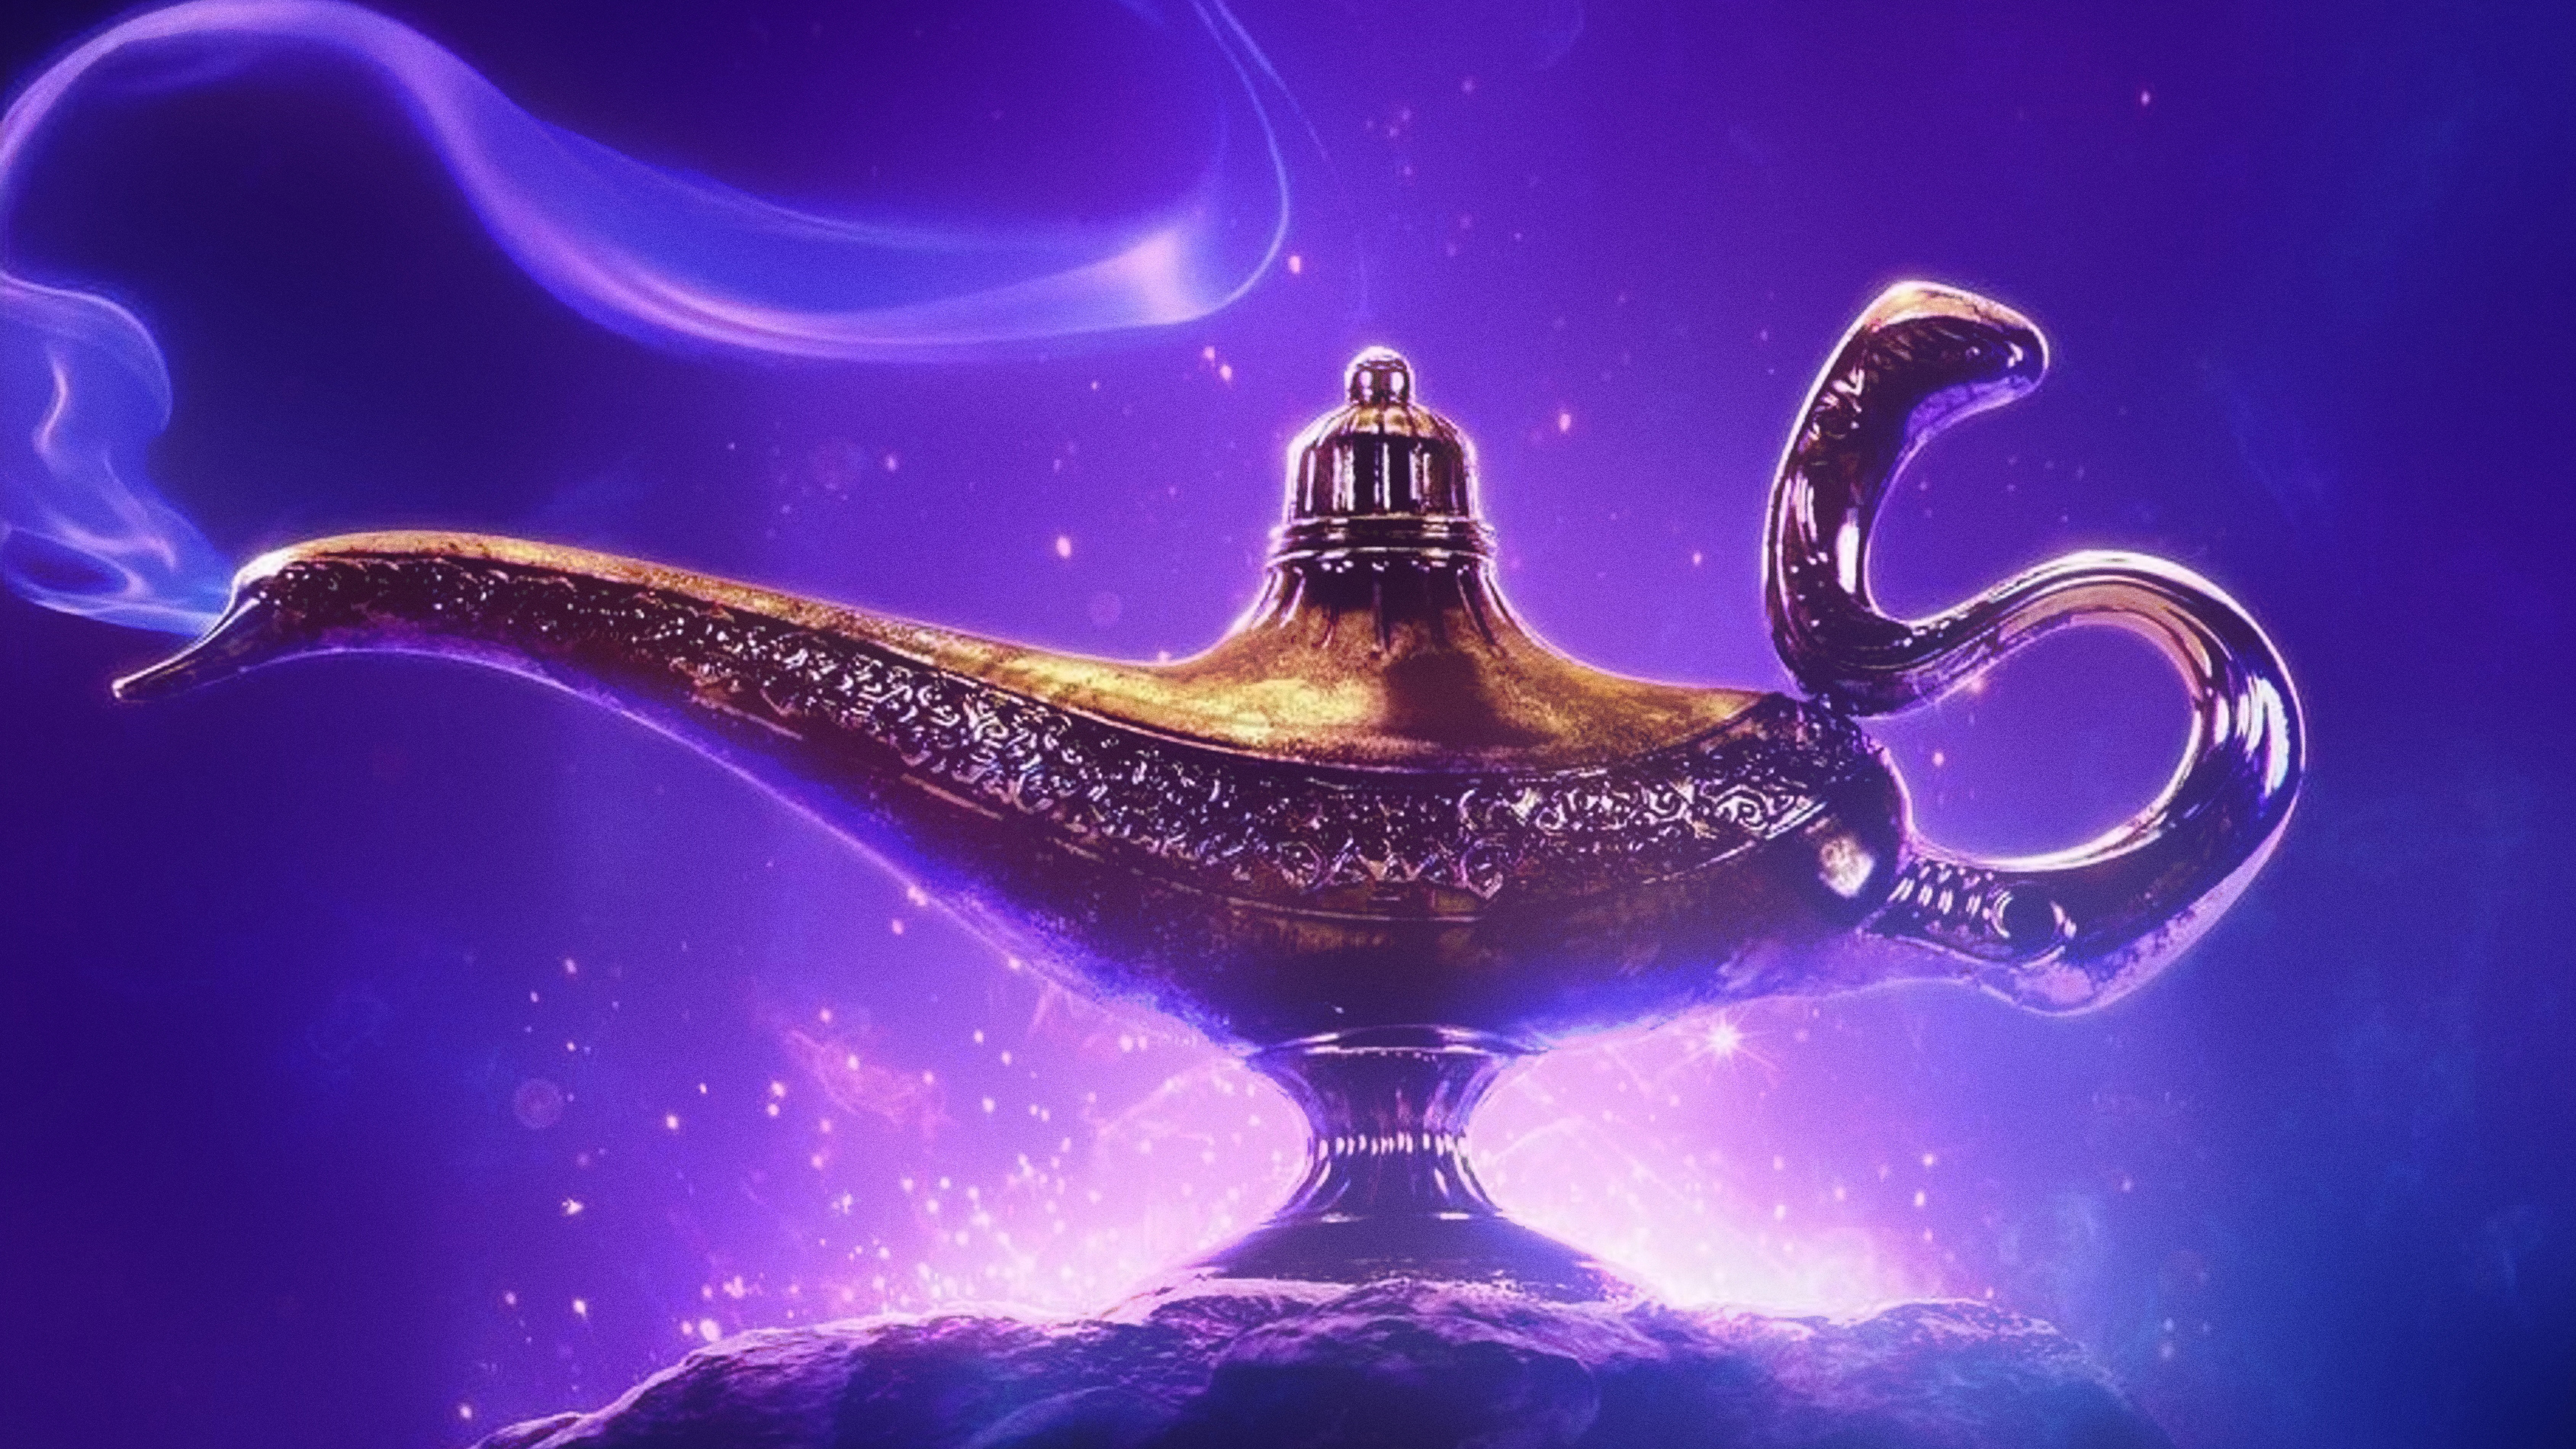 HD Wallpaper Of The Magic Lamp From The 2019 Aladdin Movie PaperPull